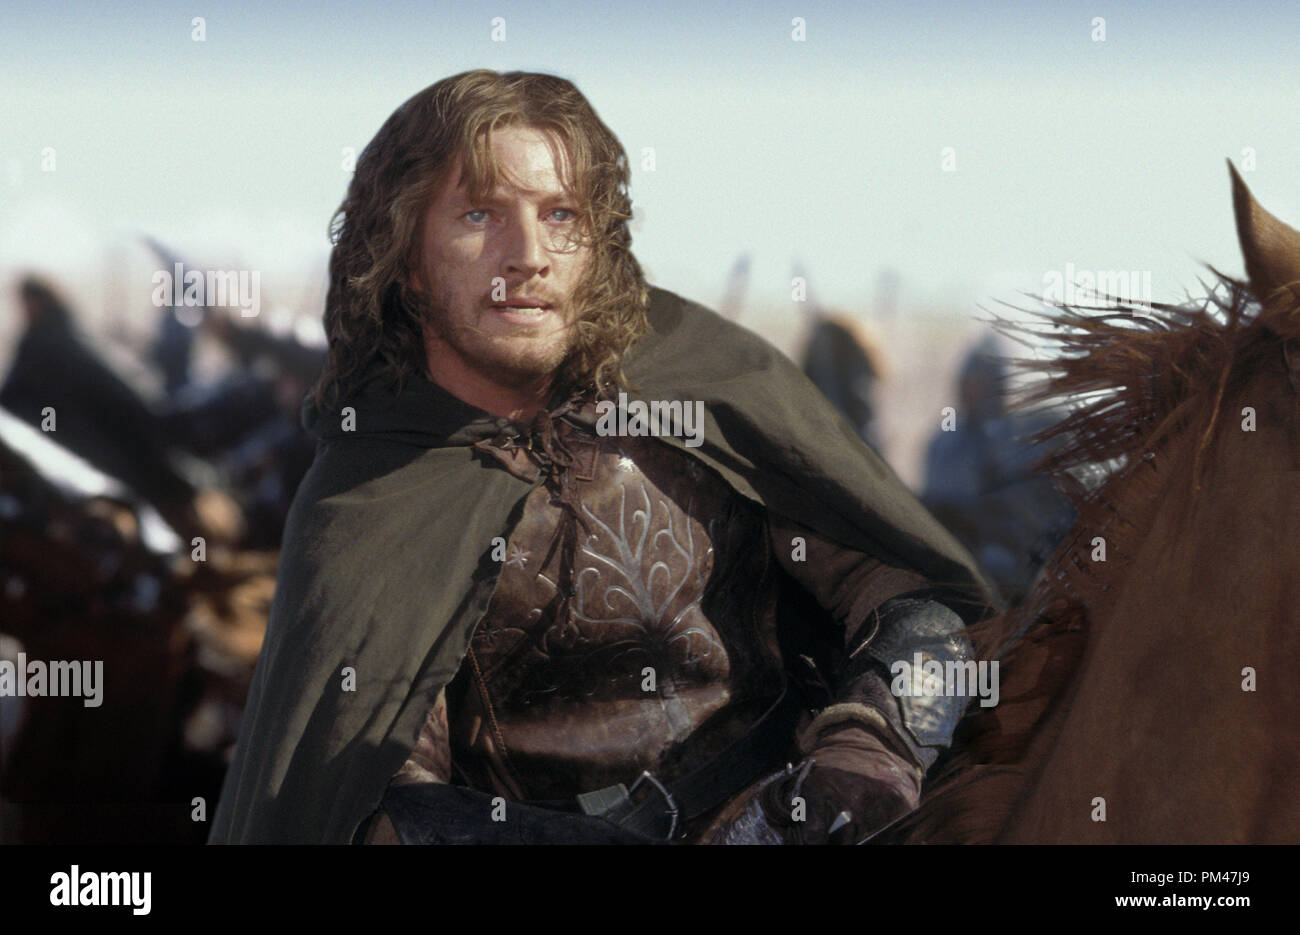 Newline Pictures Presents 'Lord of the Rings: The Return of the King' David Wenham © 2003 New Line Stock Photo